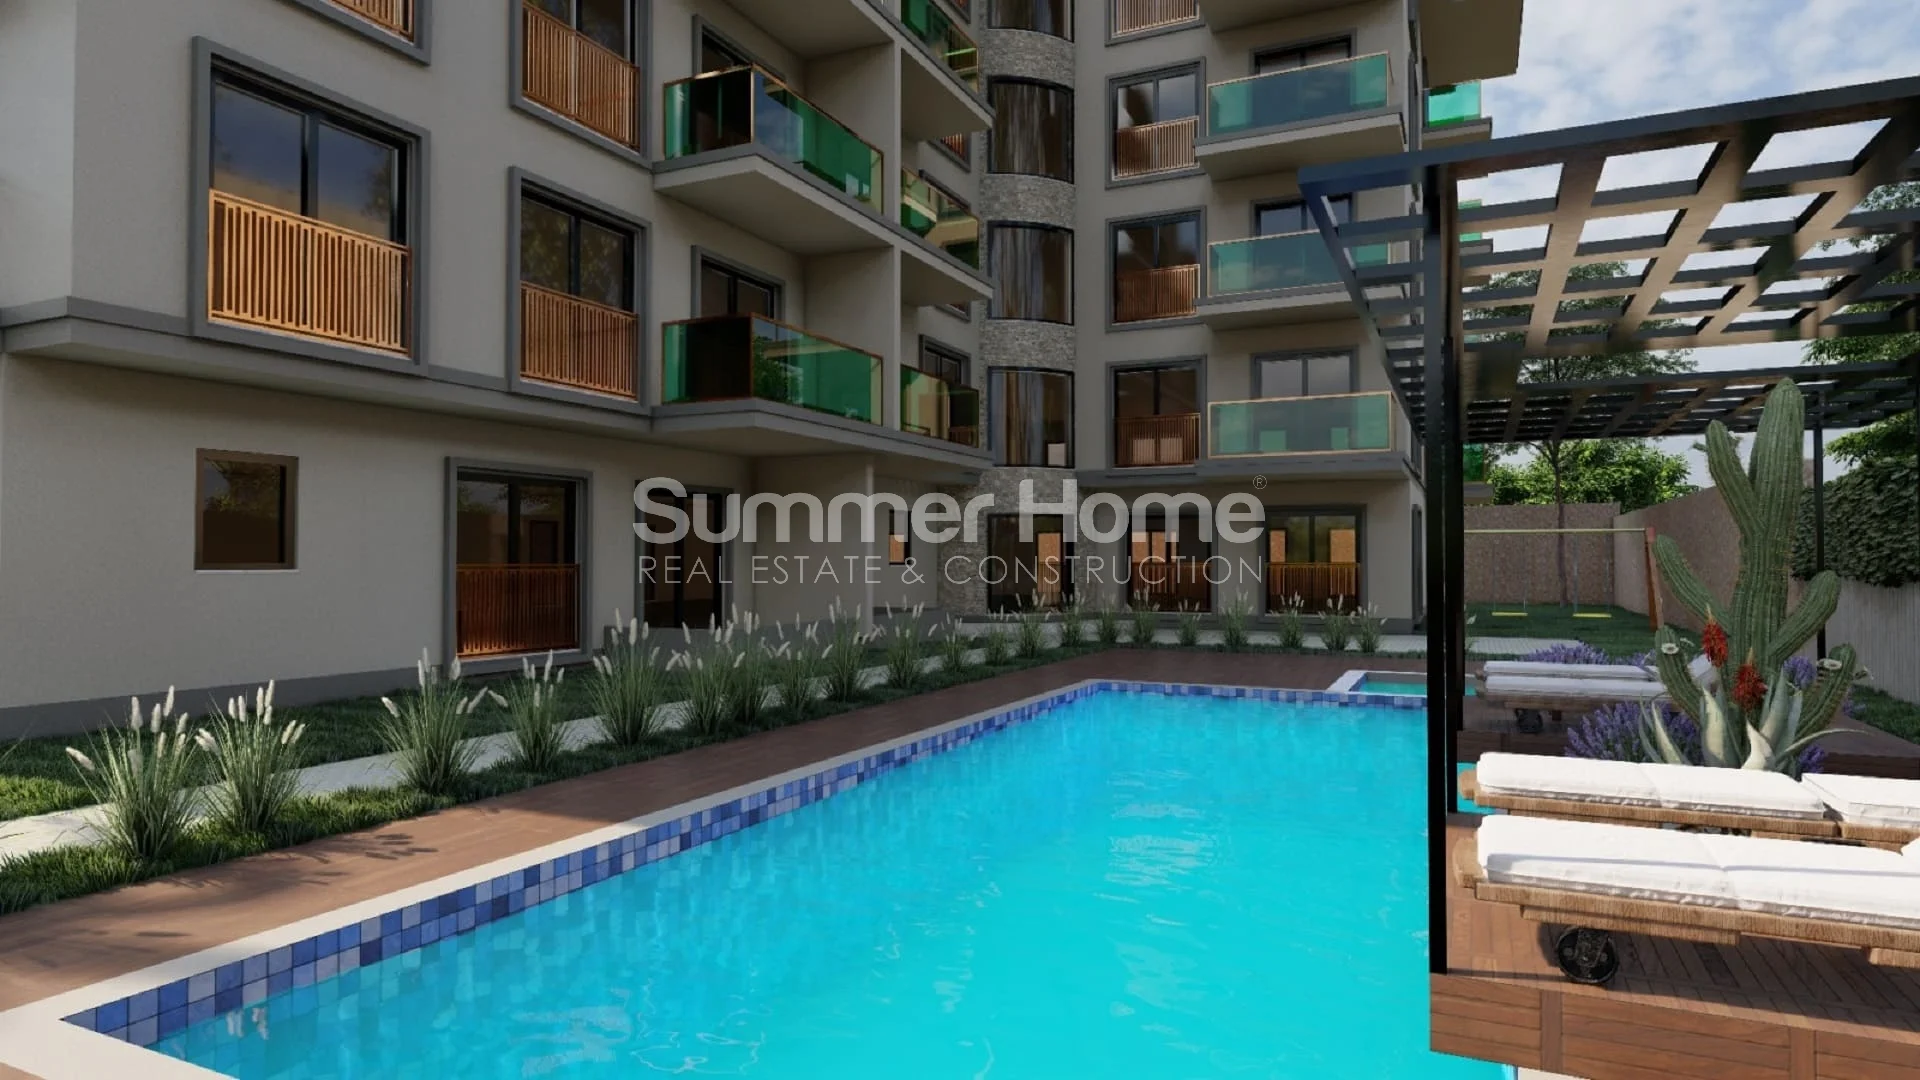 Modern Apartments At Low Prices In Payallar Facilities - 15